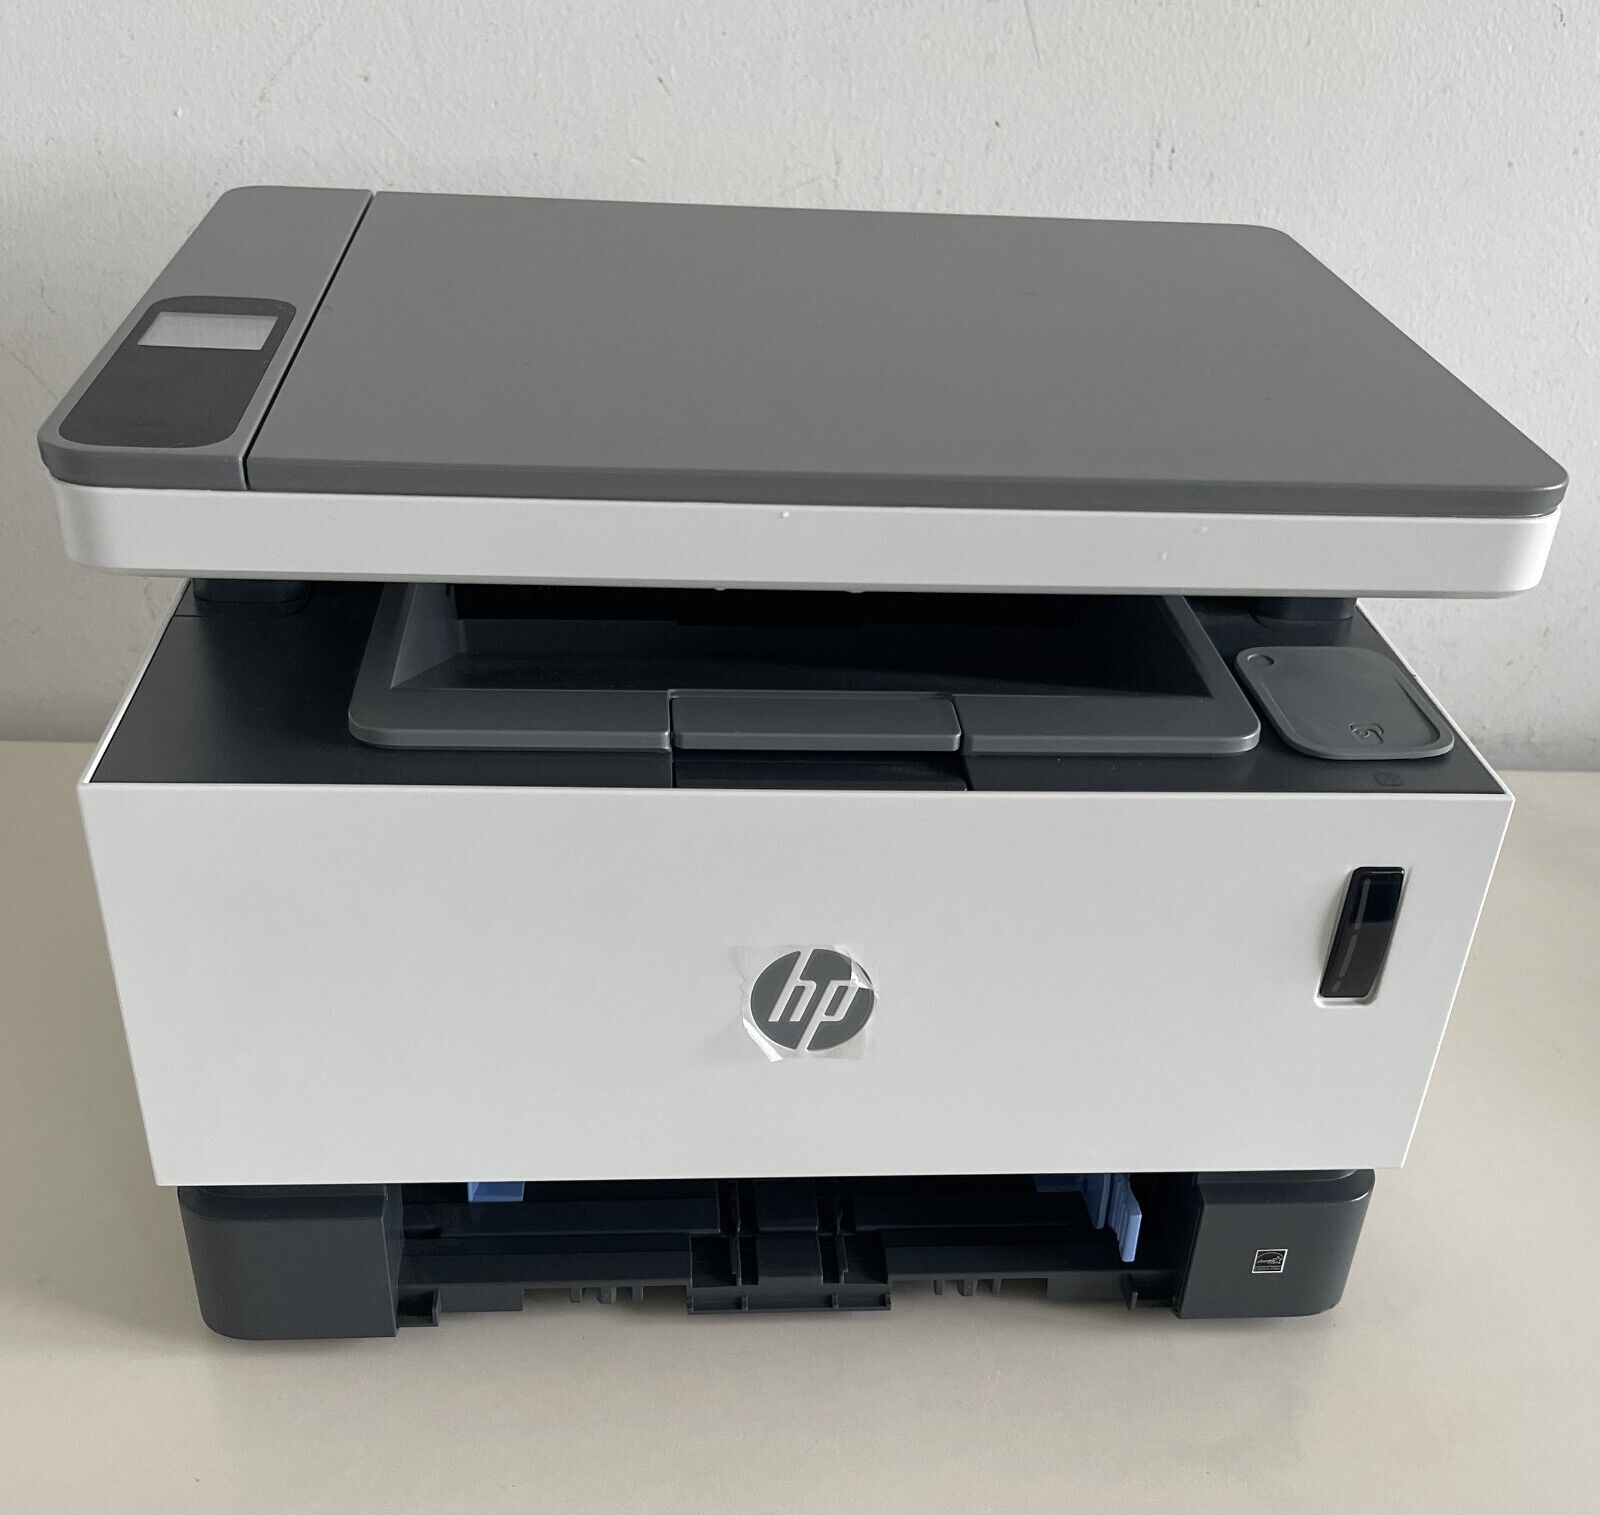 1460 Page Count HP Neverstop Laser Printer AIO MFP 1202w (5HG92A) SEOLA-1800 NY